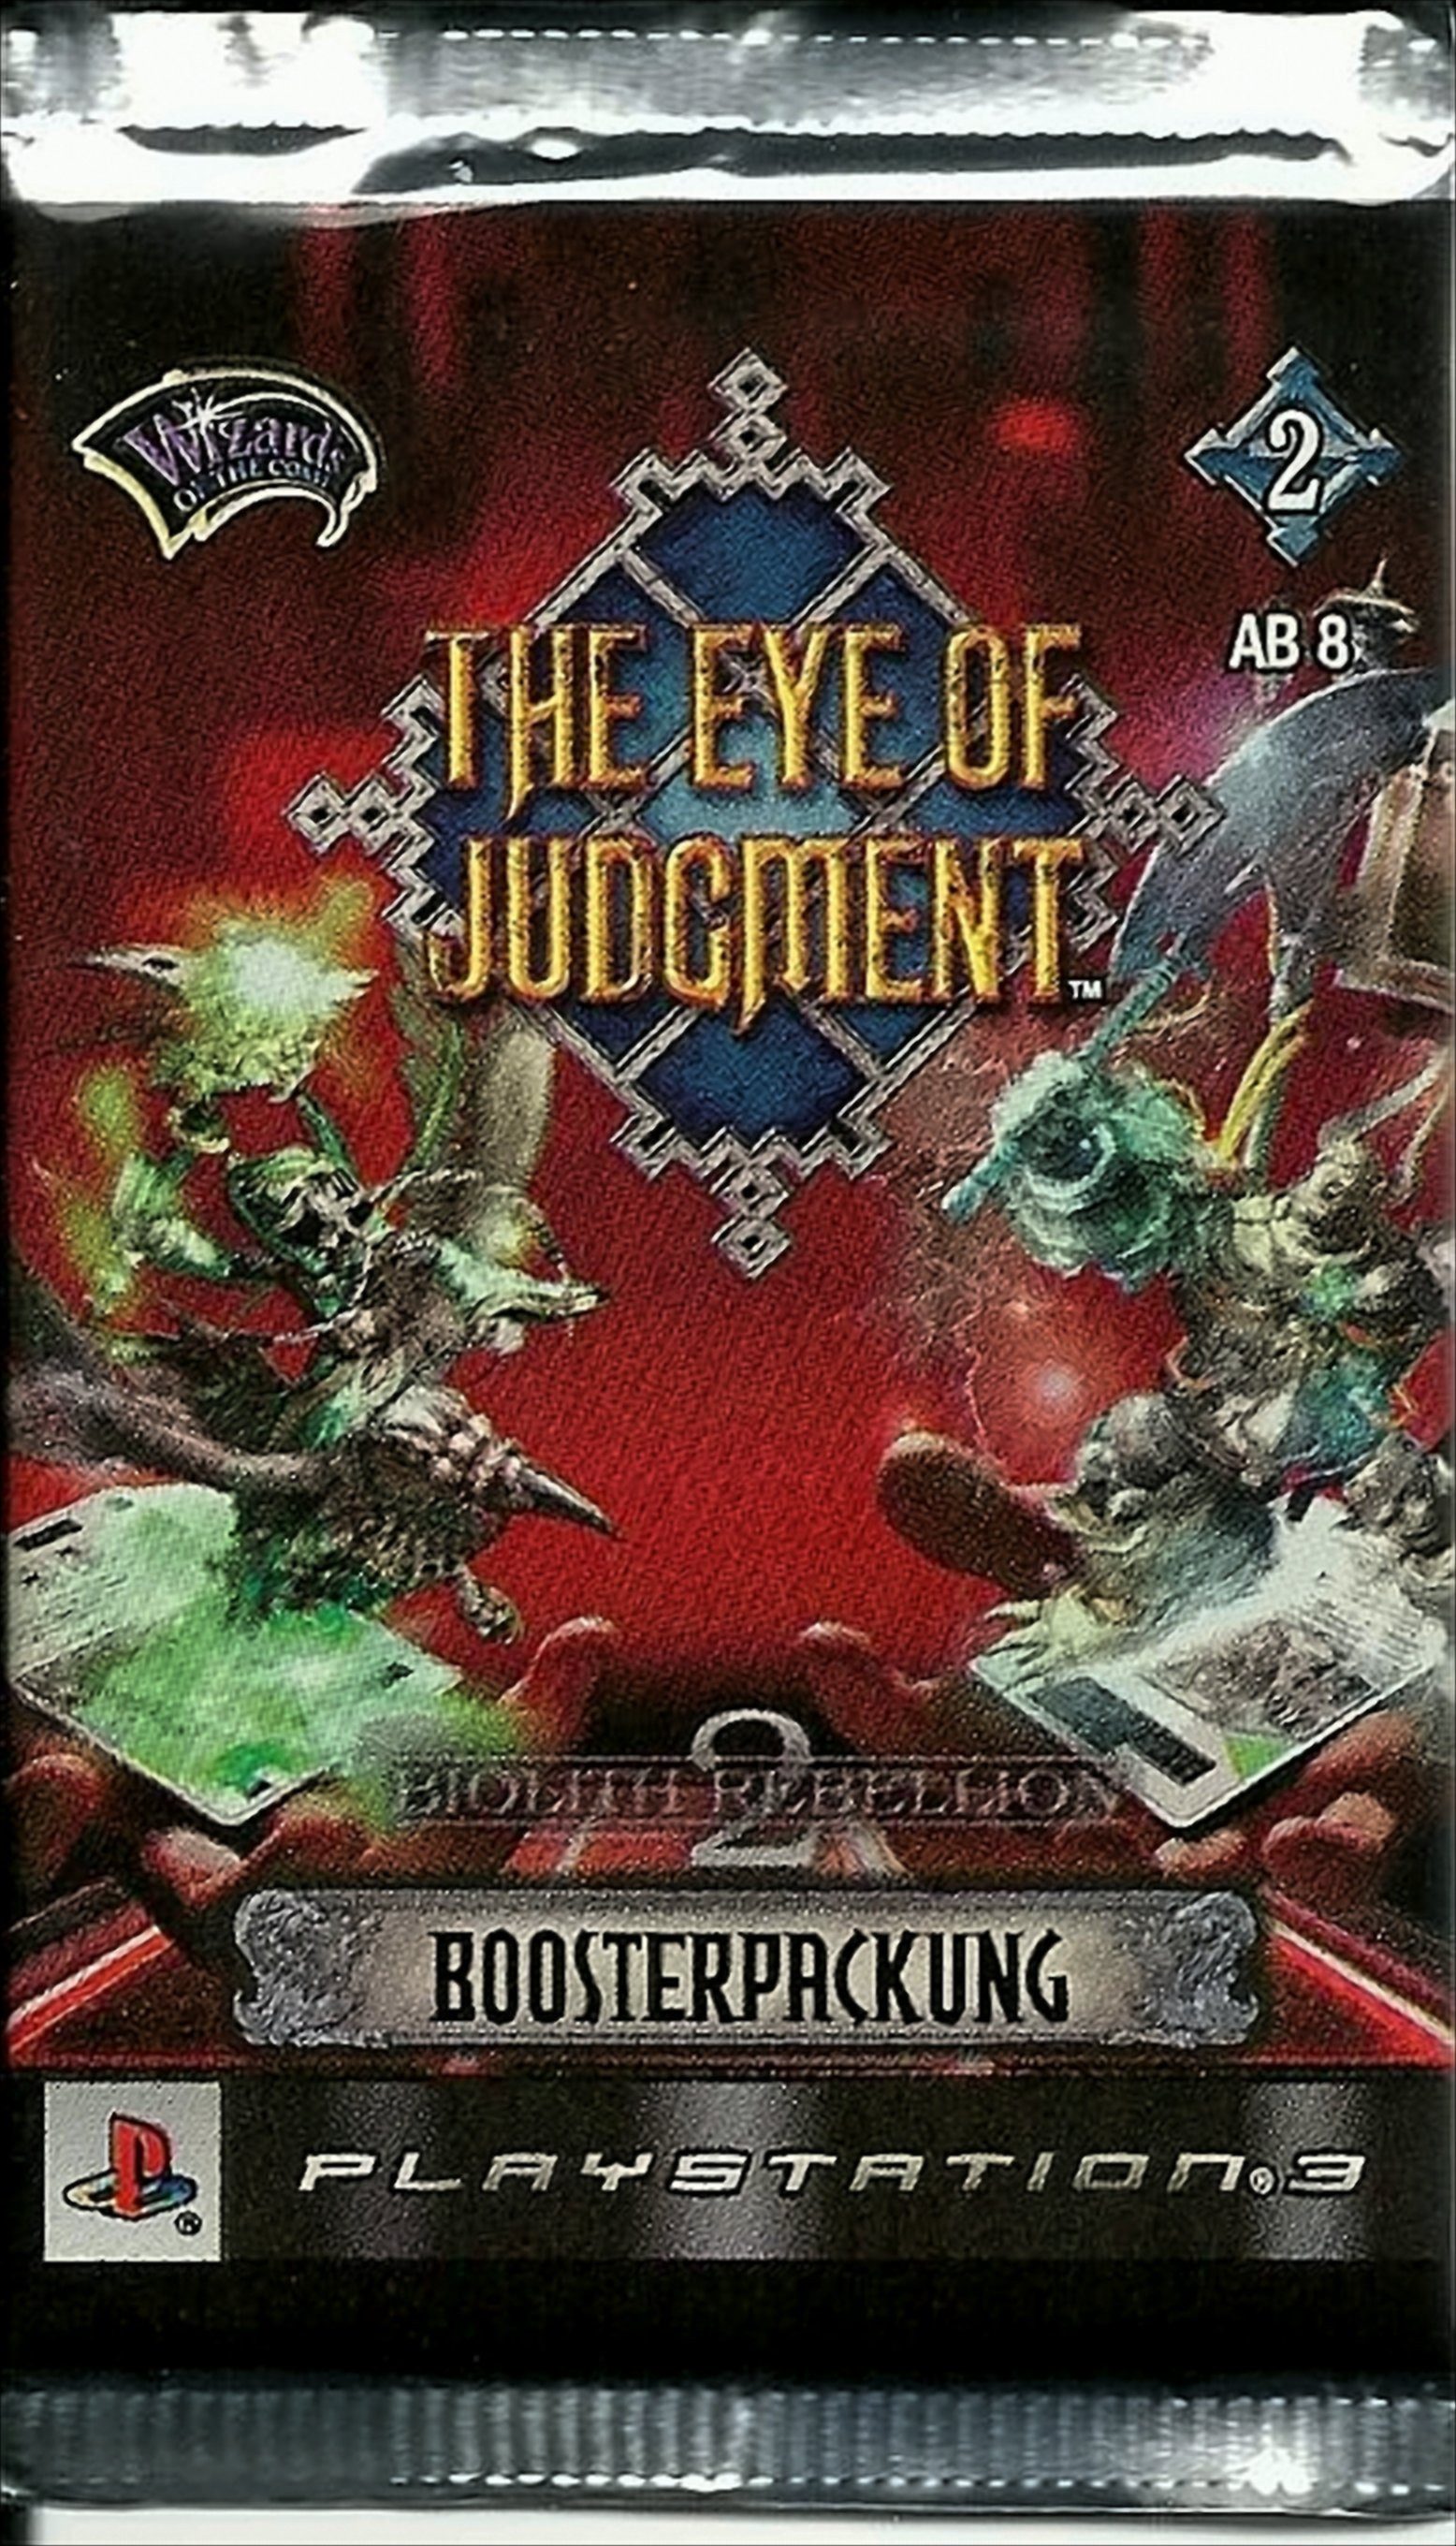 Wizards of the Coast Sammelkarte The Eye of Judgment Booster Biolith Rebellion 2